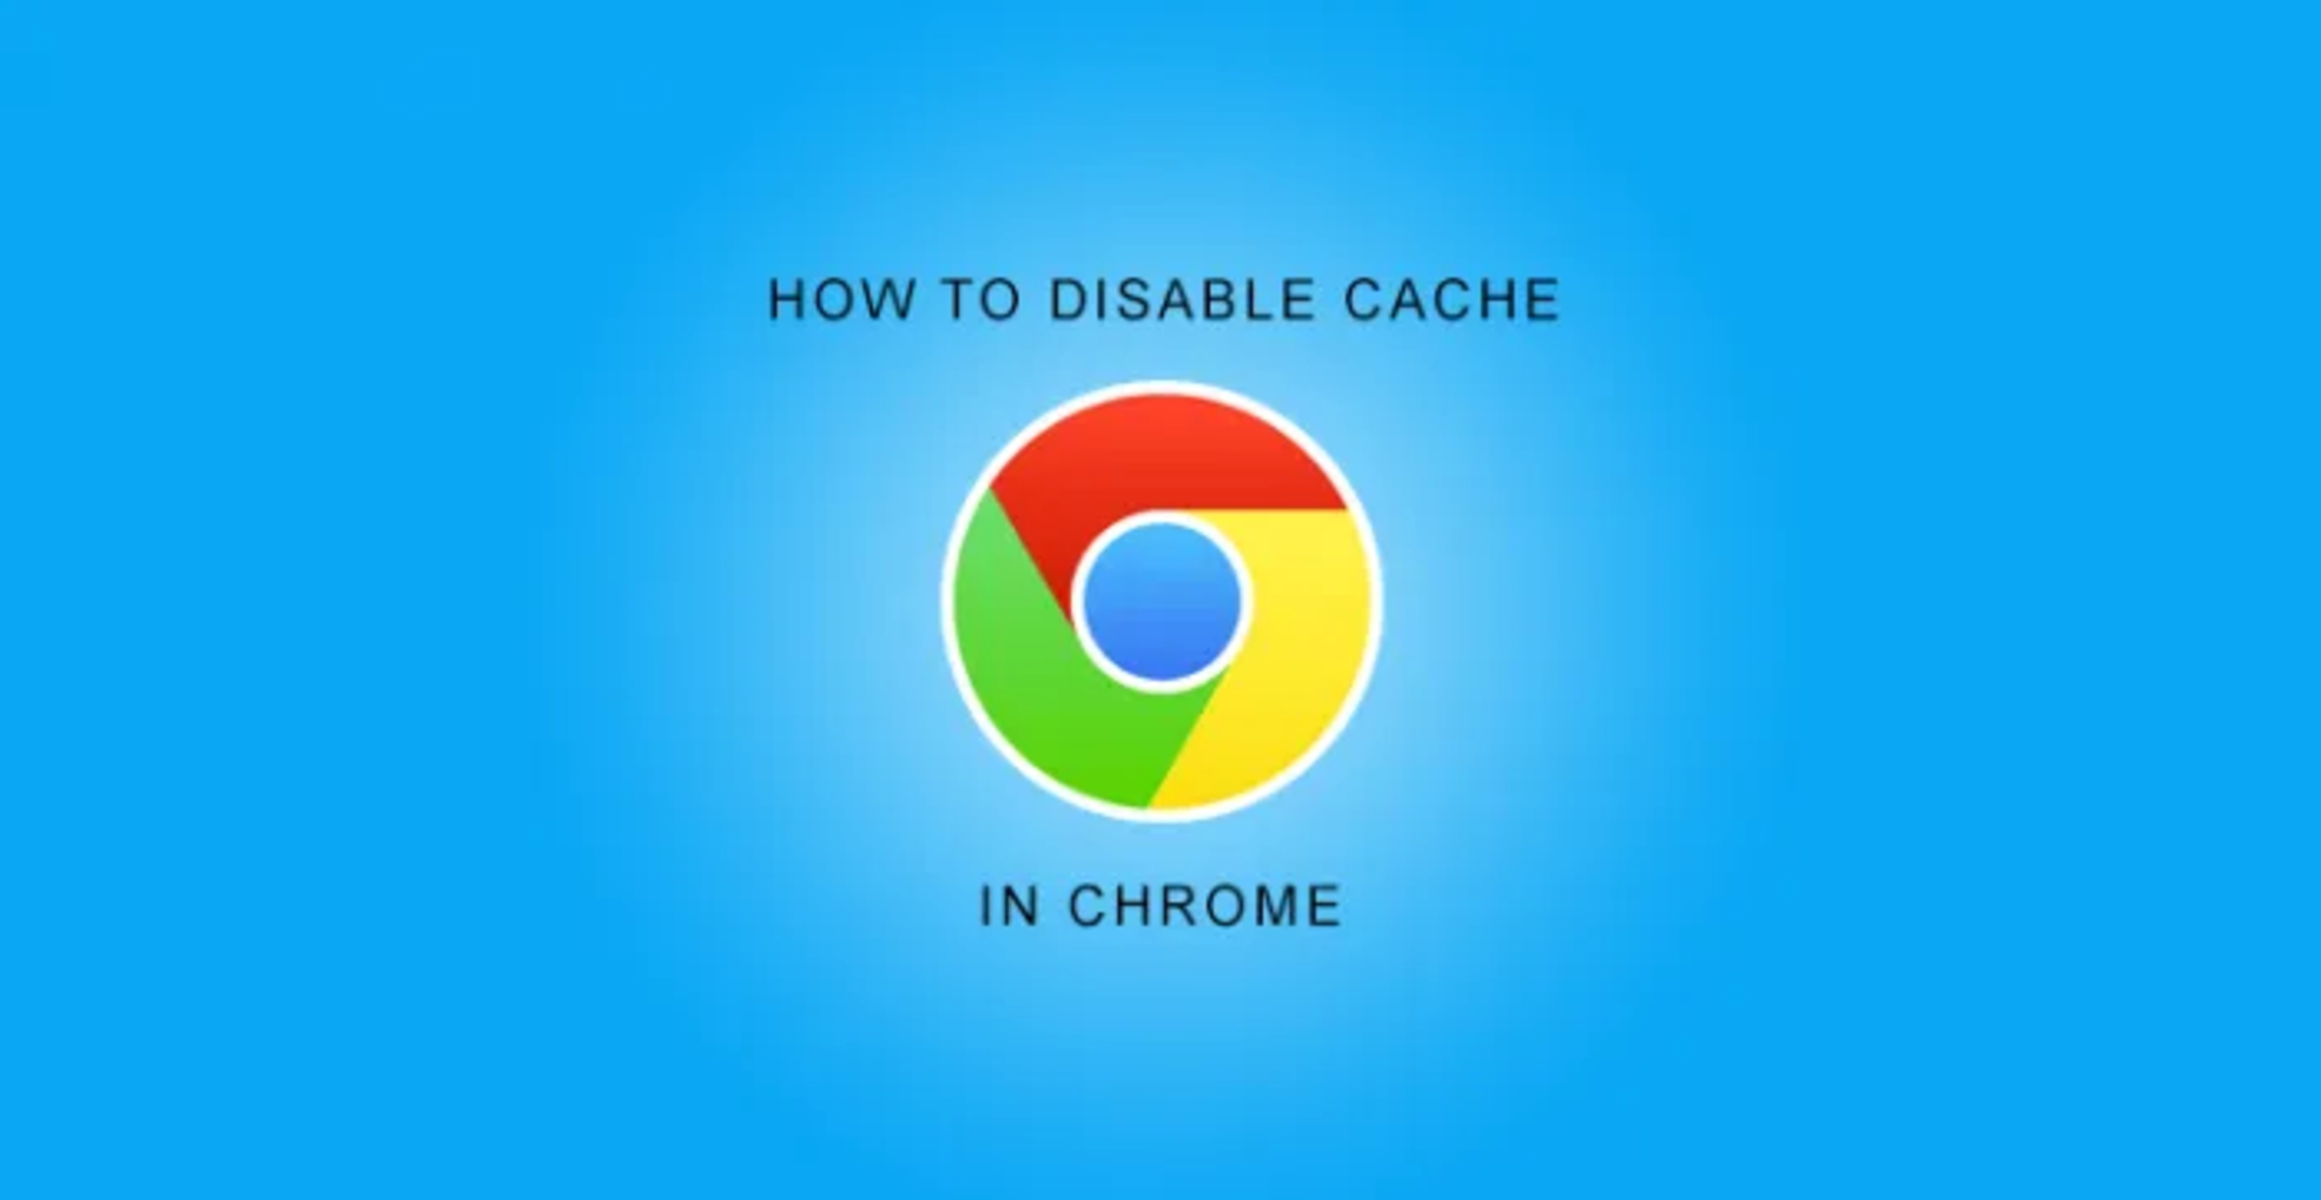 How To Disable Cache In Chrome